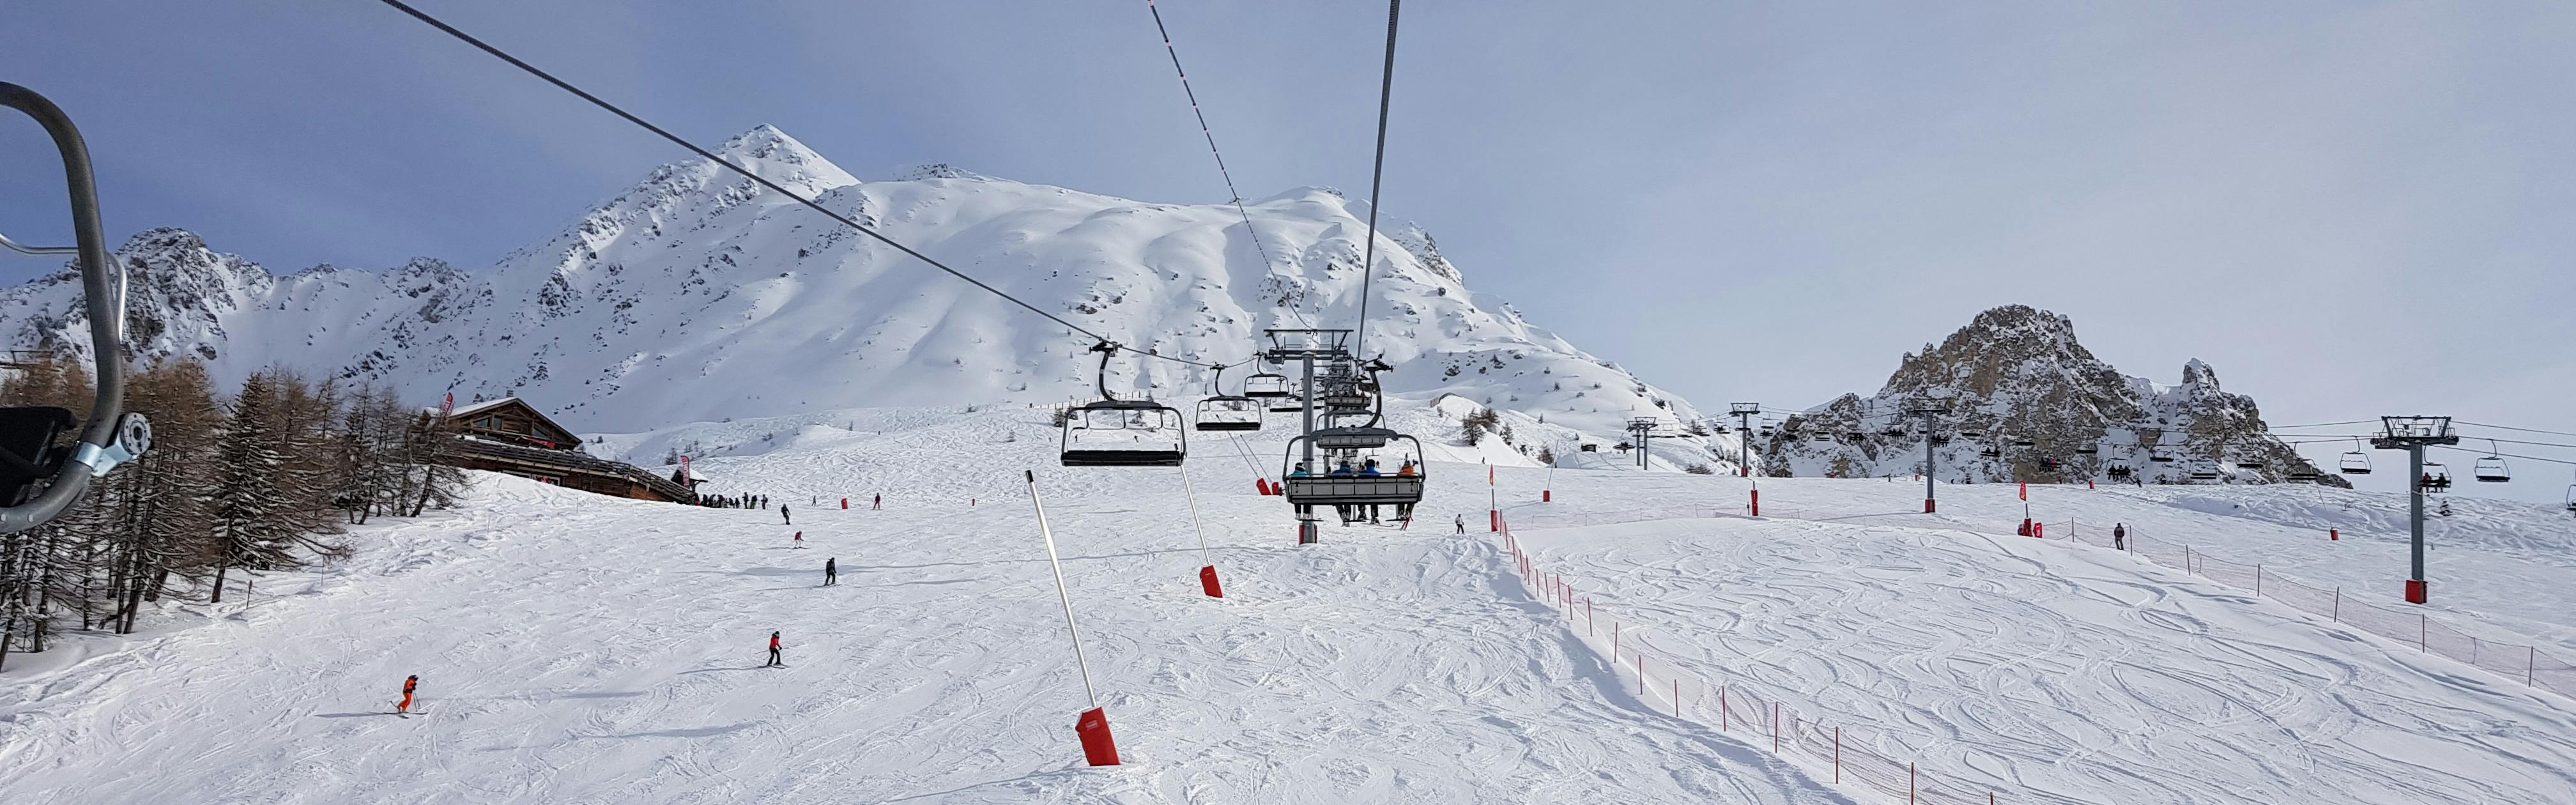 A chairlift moves across a ski hill